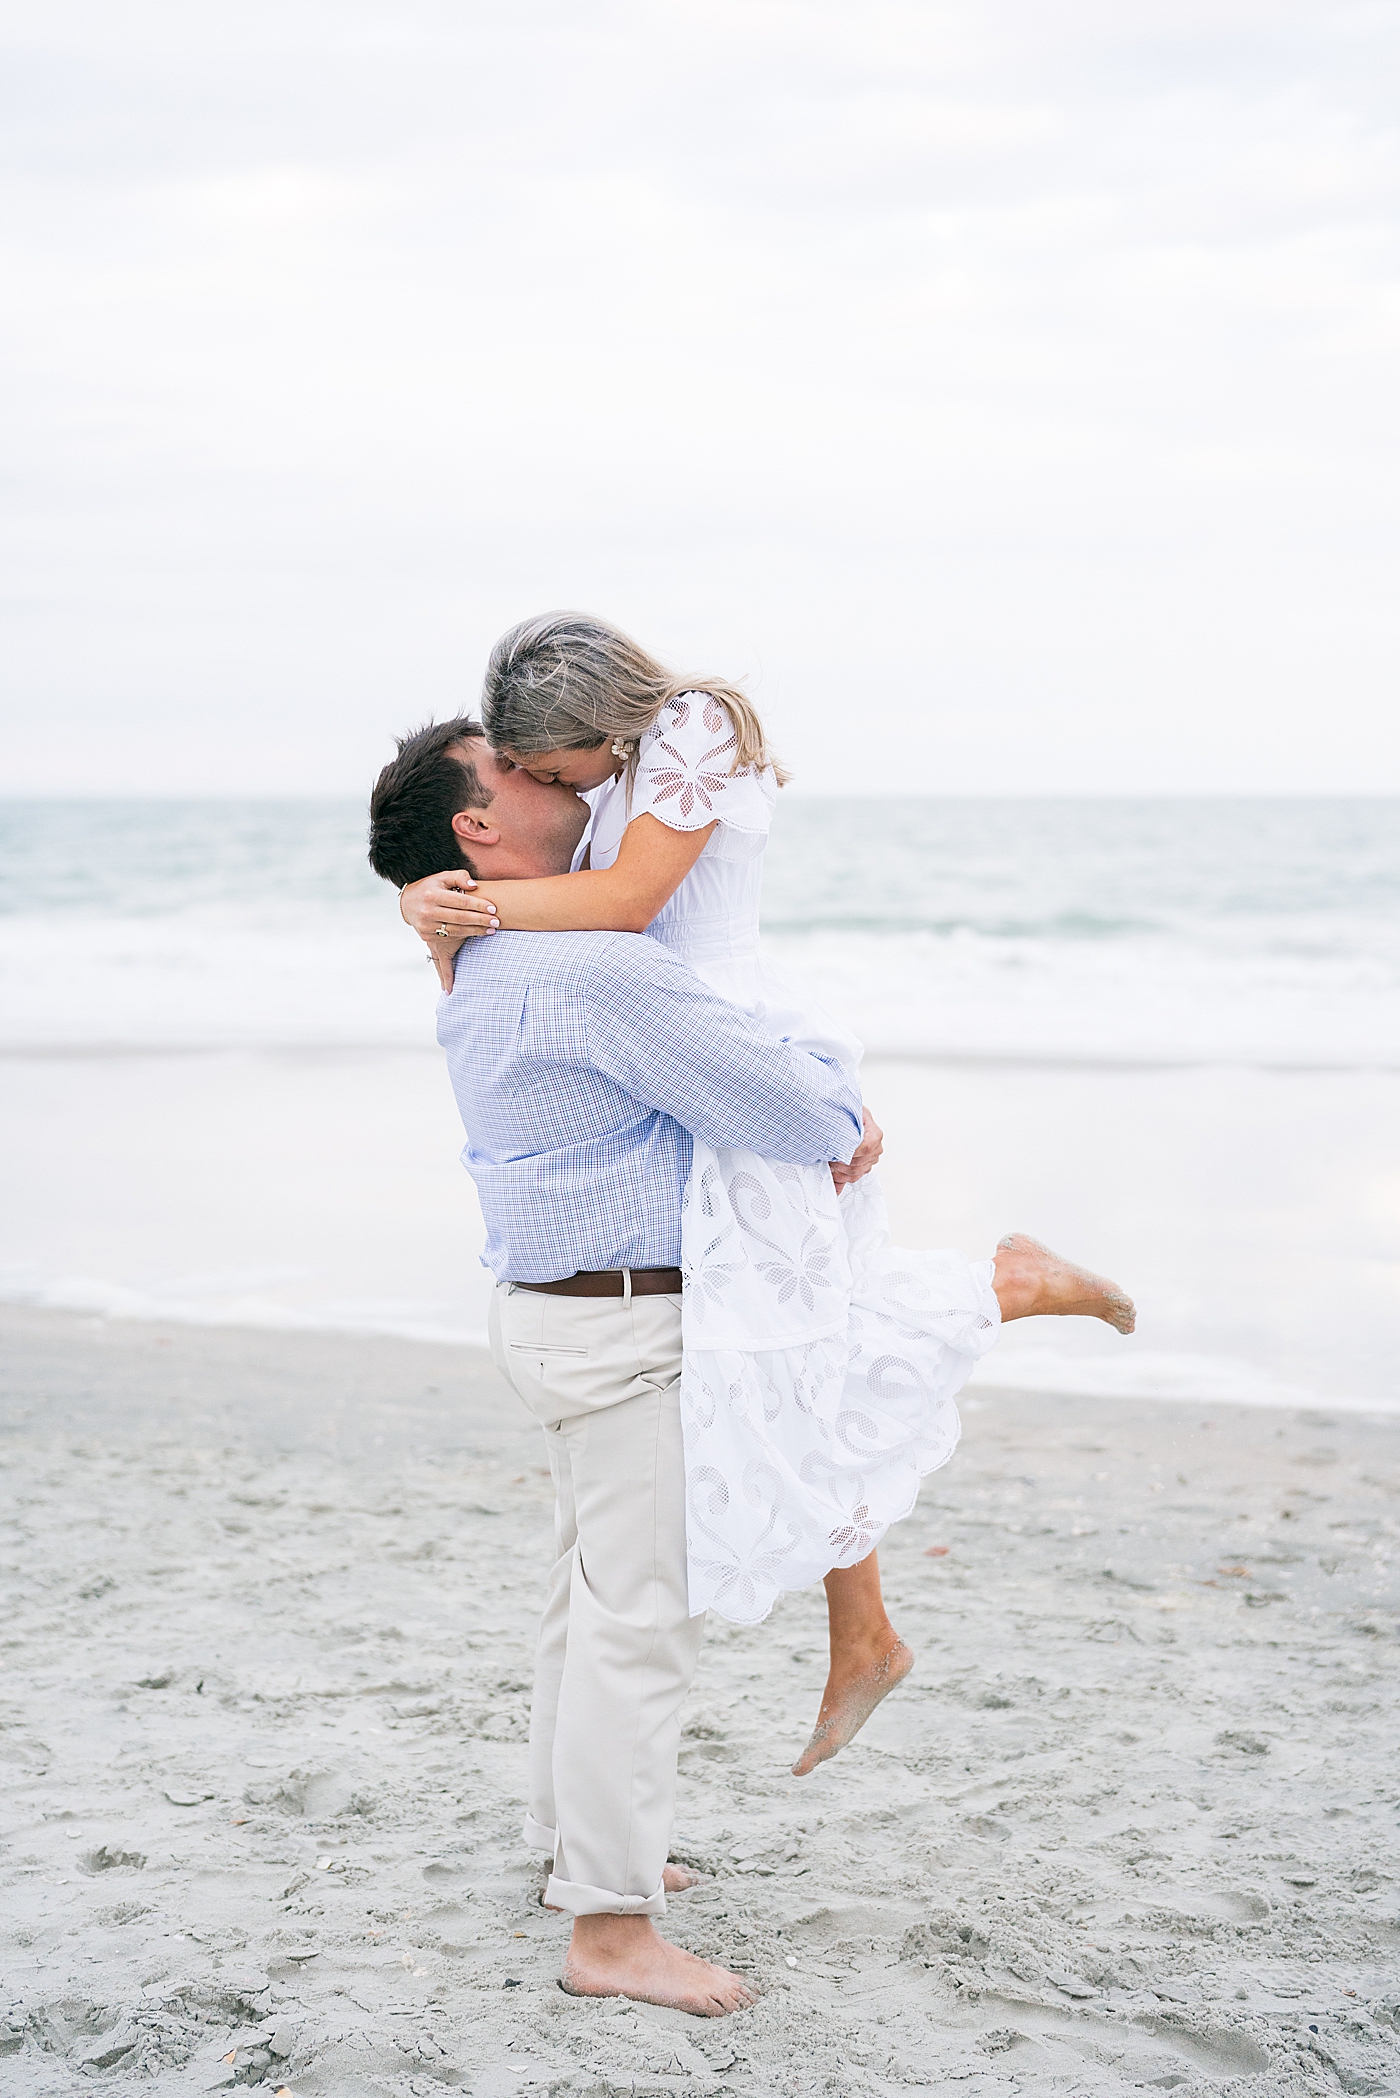 Couple kissing on the beach during their engagement session | Image by Annie Laura Photo